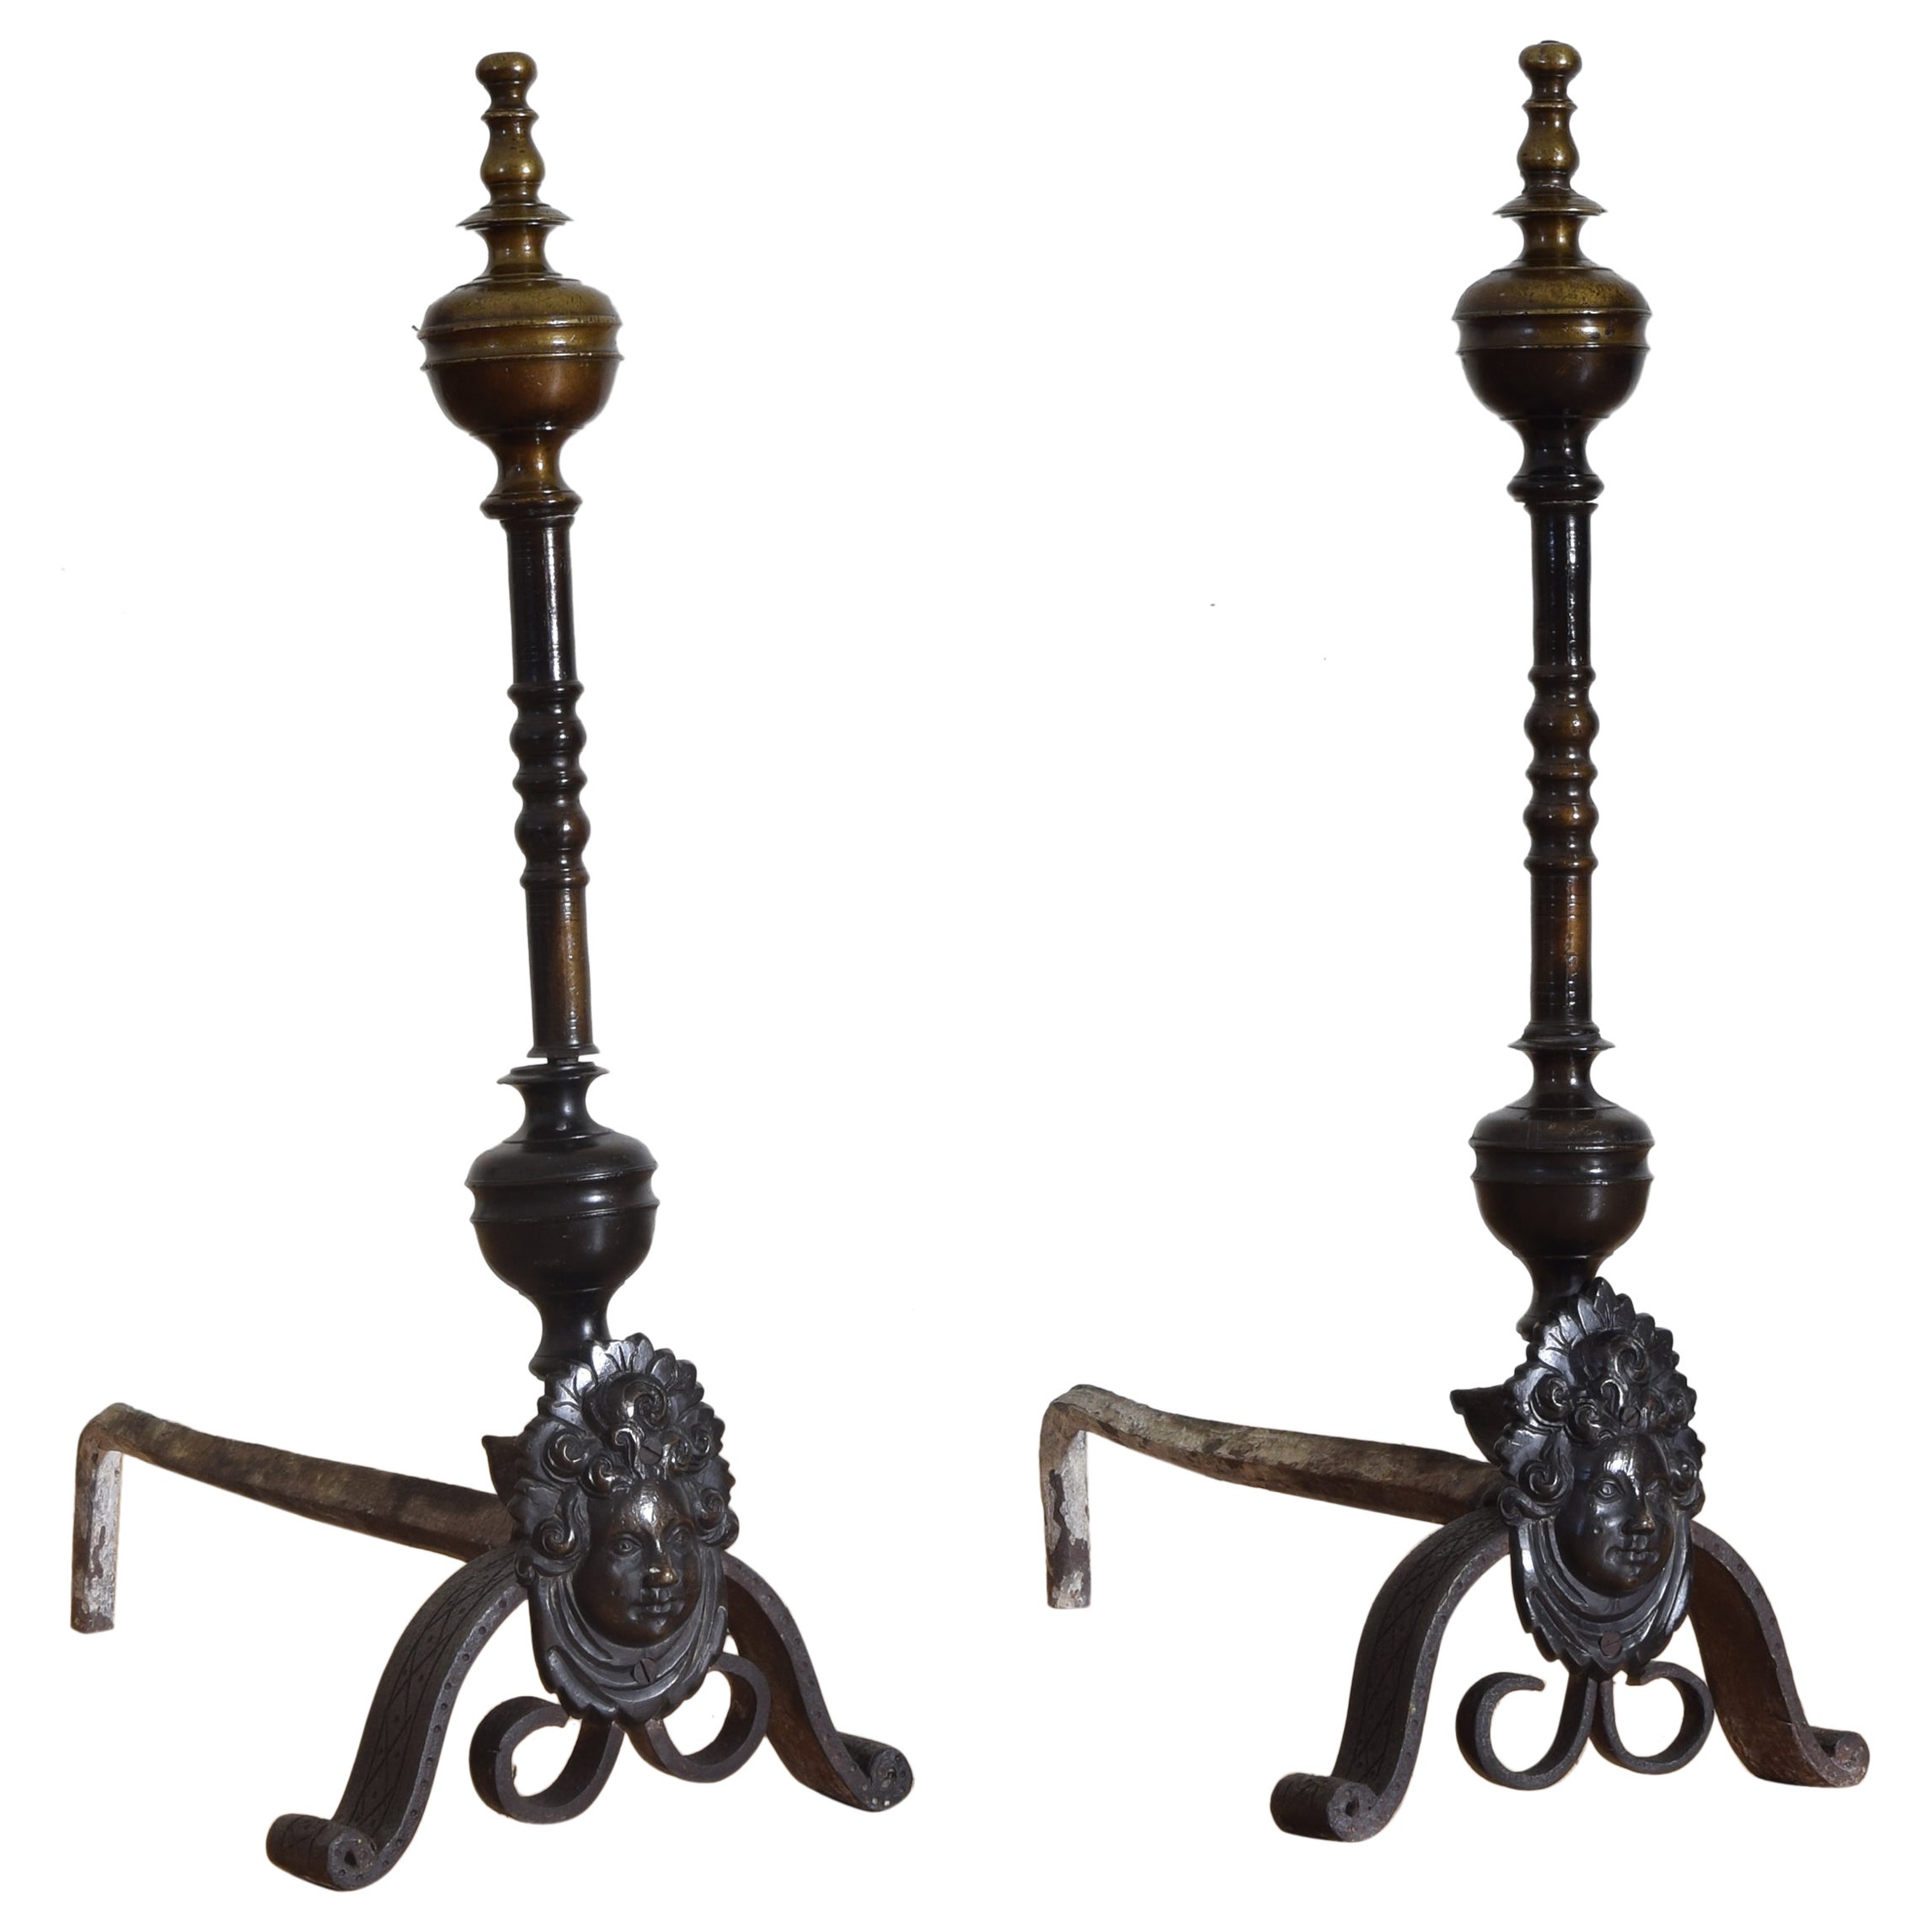 Pair French Louis XIV Period Brass & Wrought Iron Andirons, early 18th century